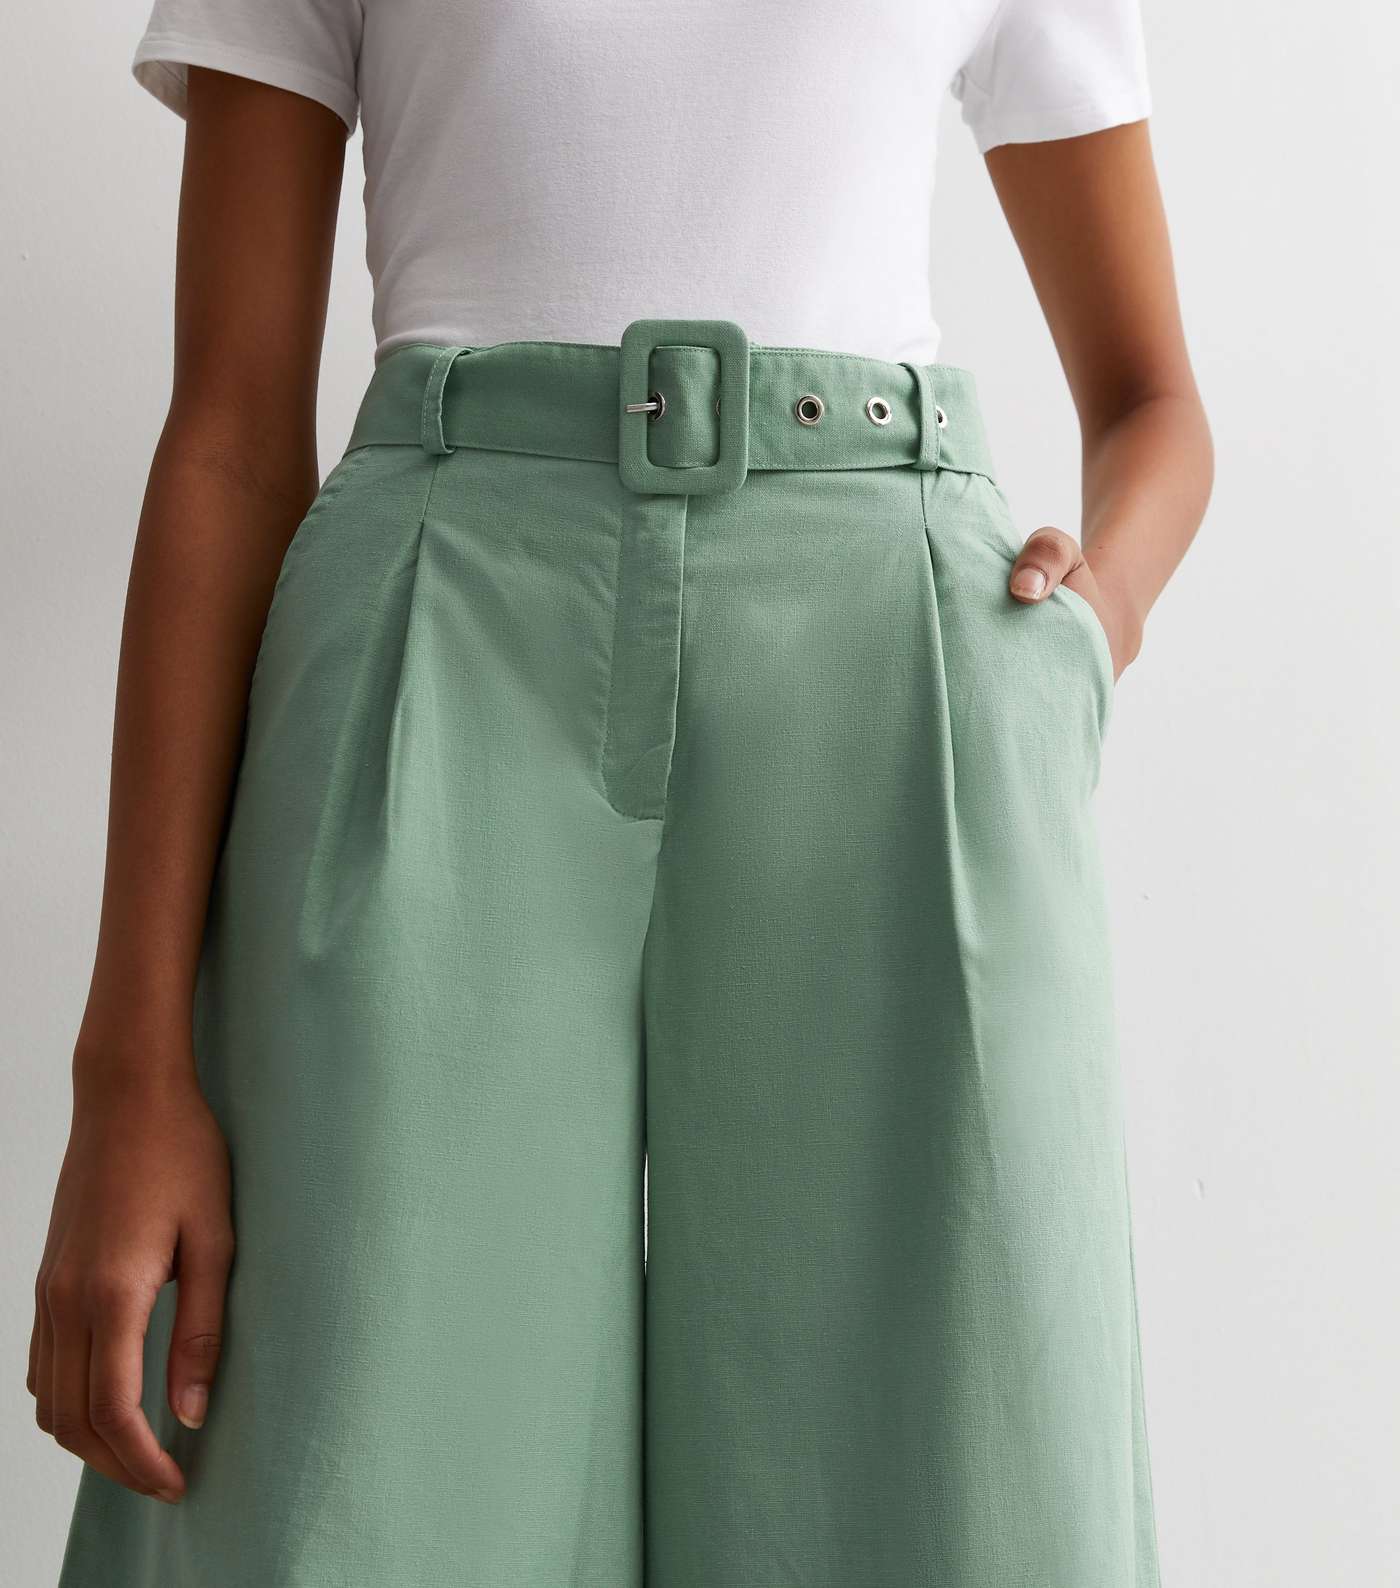 Gini London Green Linen-Look Belted Wide Leg Trousers Image 2